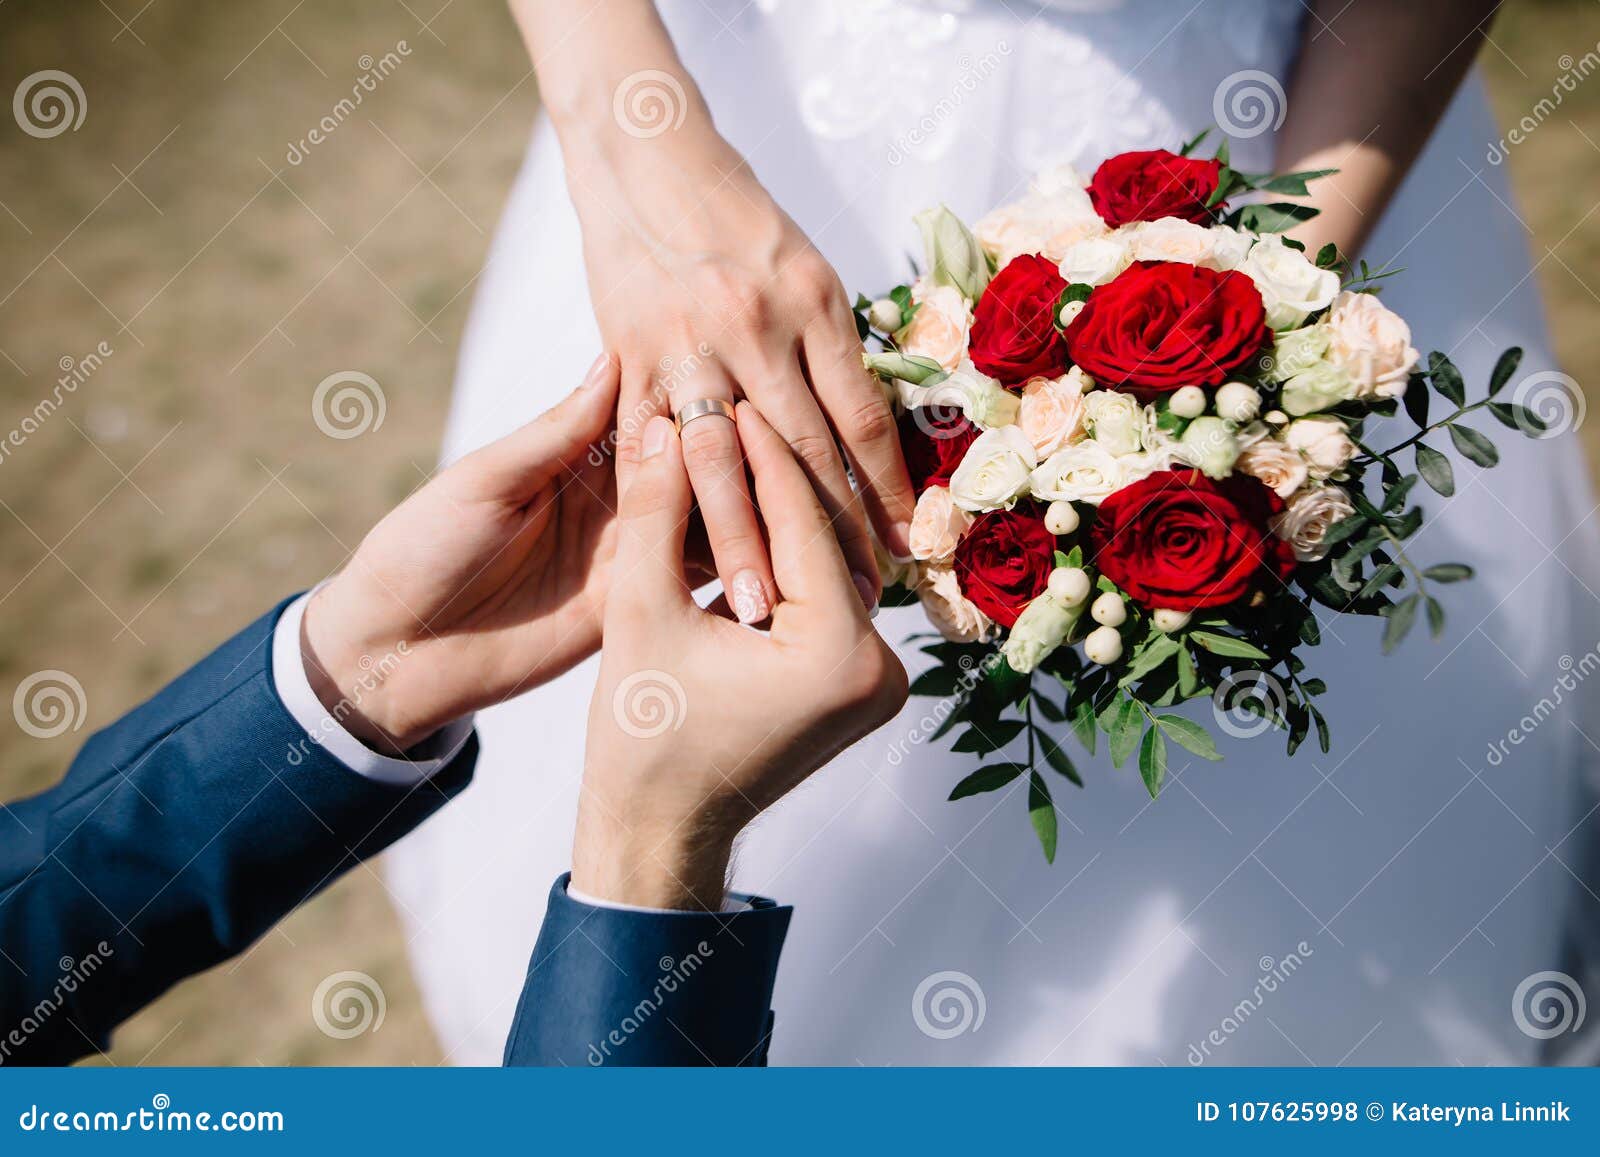 love and marriage. fine art rustic wedding ceremony outside. groom putting golden ring on the bride`s finger. bouquet of red and